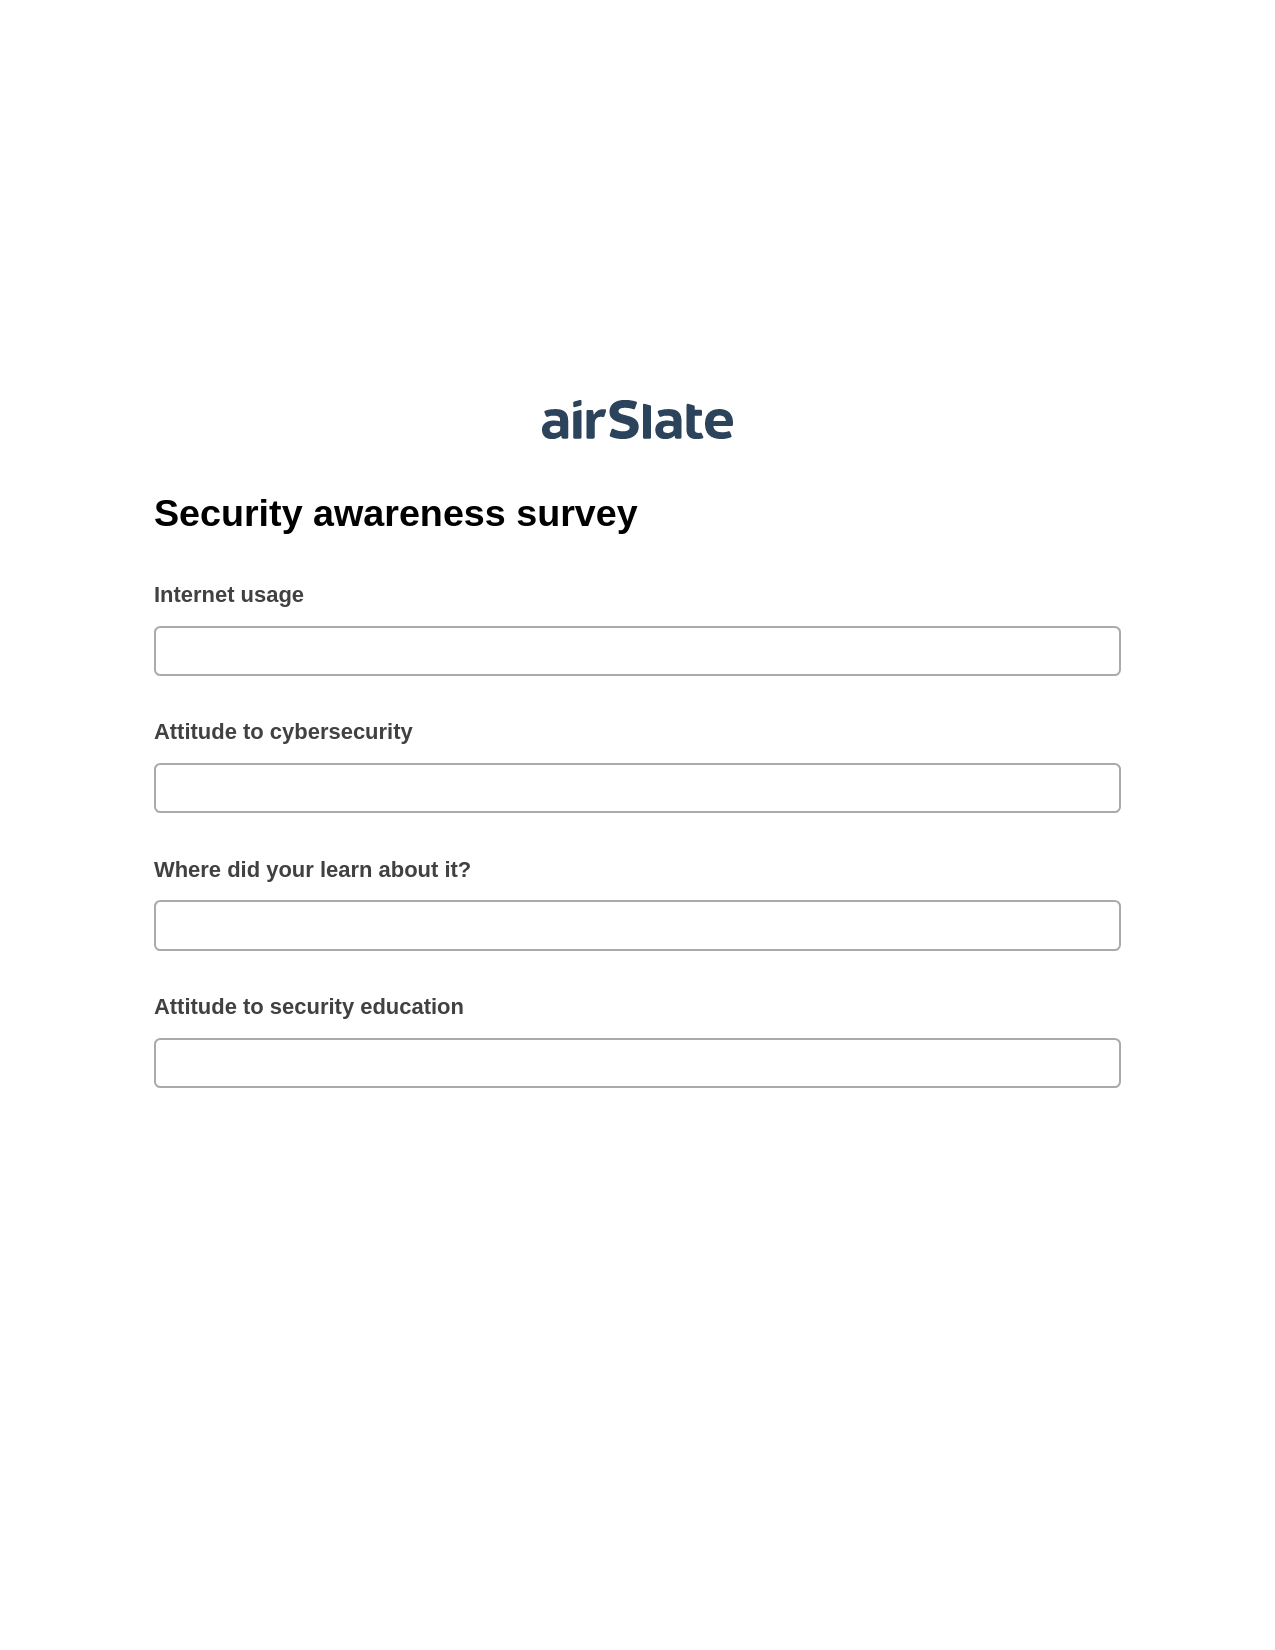 Security awareness survey Pre-fill from CSV File Dropdown Options Bot, Assign Slate Name Bot, Box Bot